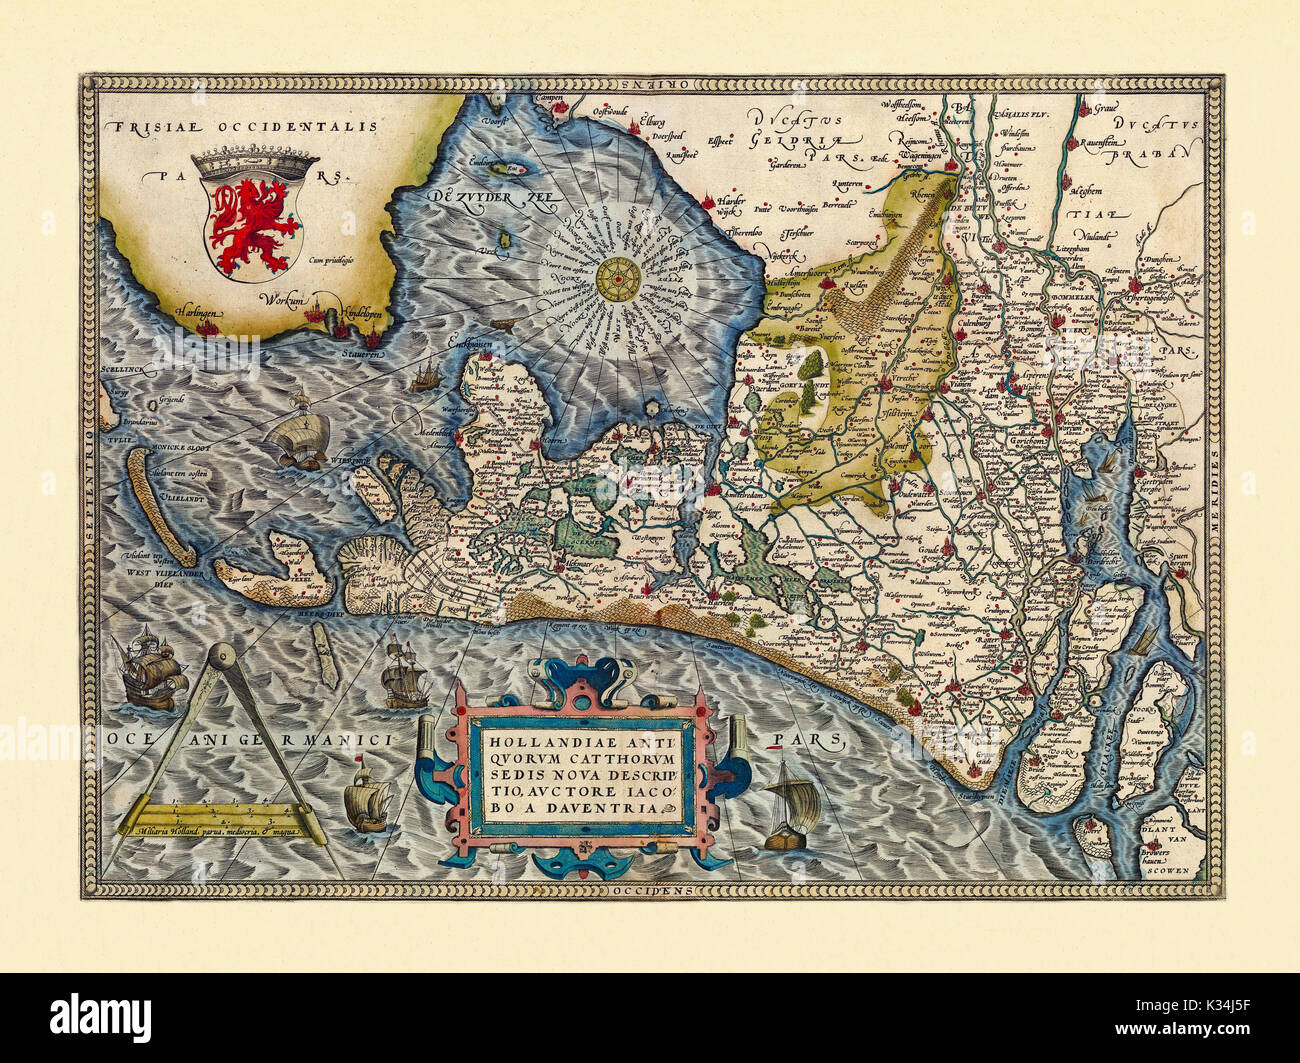 Old map of Netherlands. Excellent state of preservation realized in ancient style. All the graphic composition is inside a frame. By Ortelius, Theatrum Orbis Terrarum, Antwerp, 1570 Stock Photo